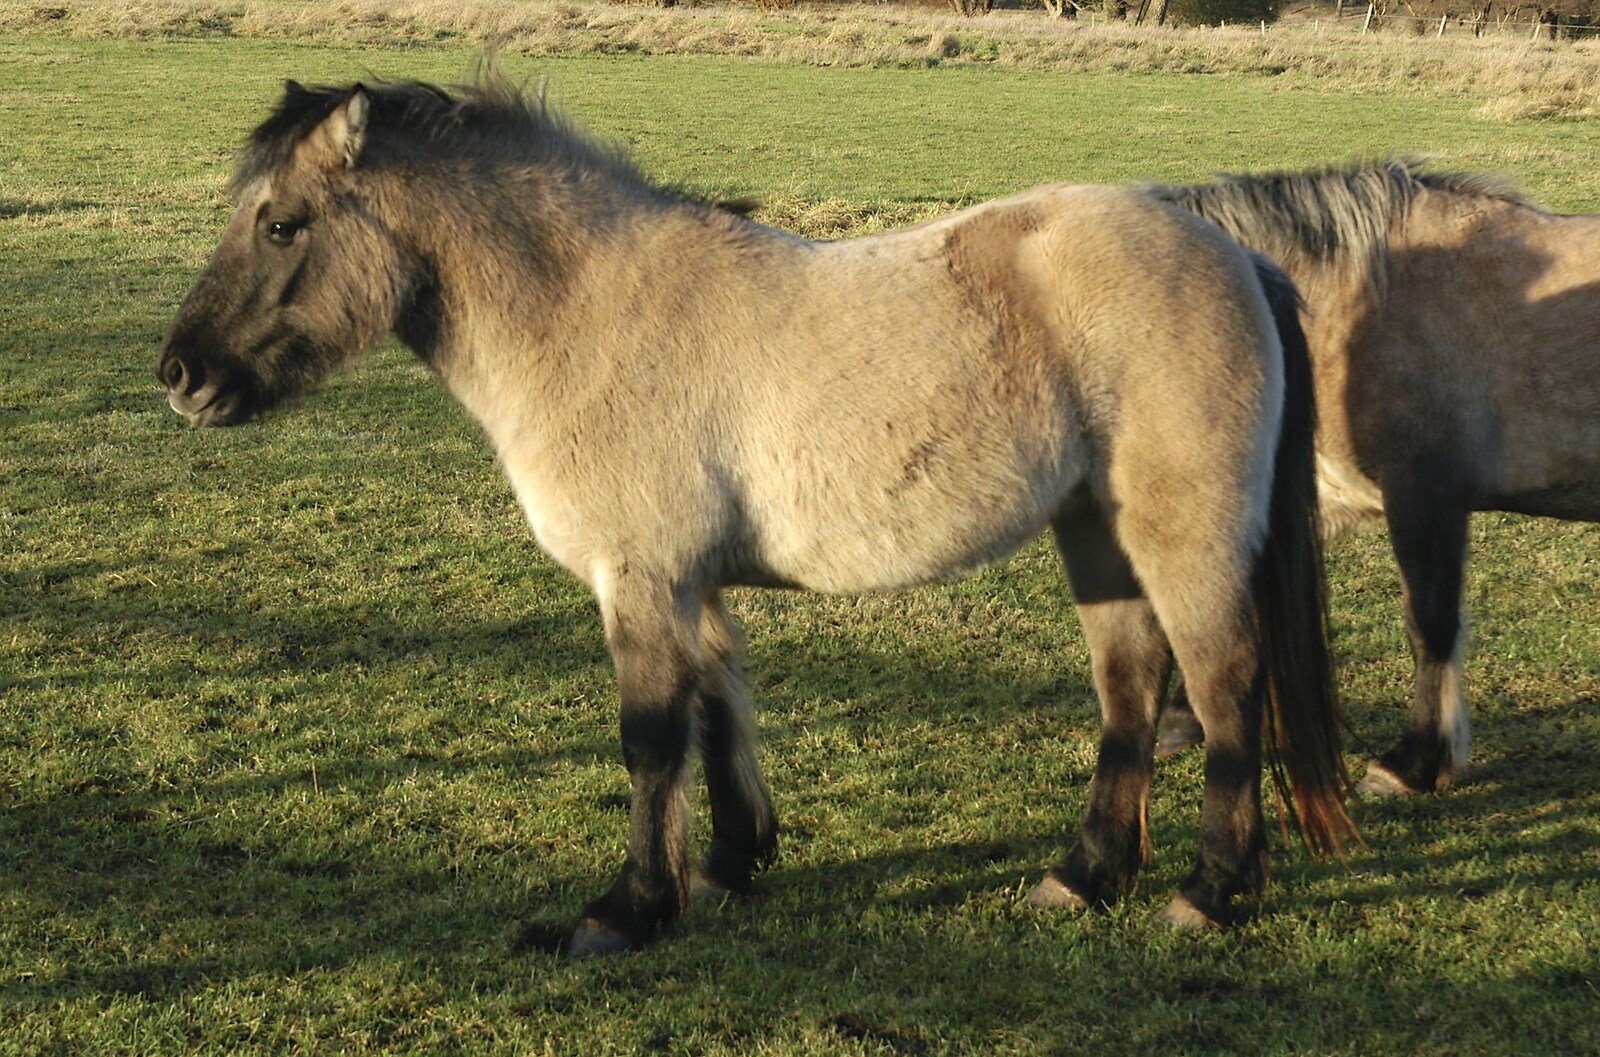 Some shaggy ponies from Boxing Day Rambles, Hoxne and Oakley, Suffolk - 26th December 2004